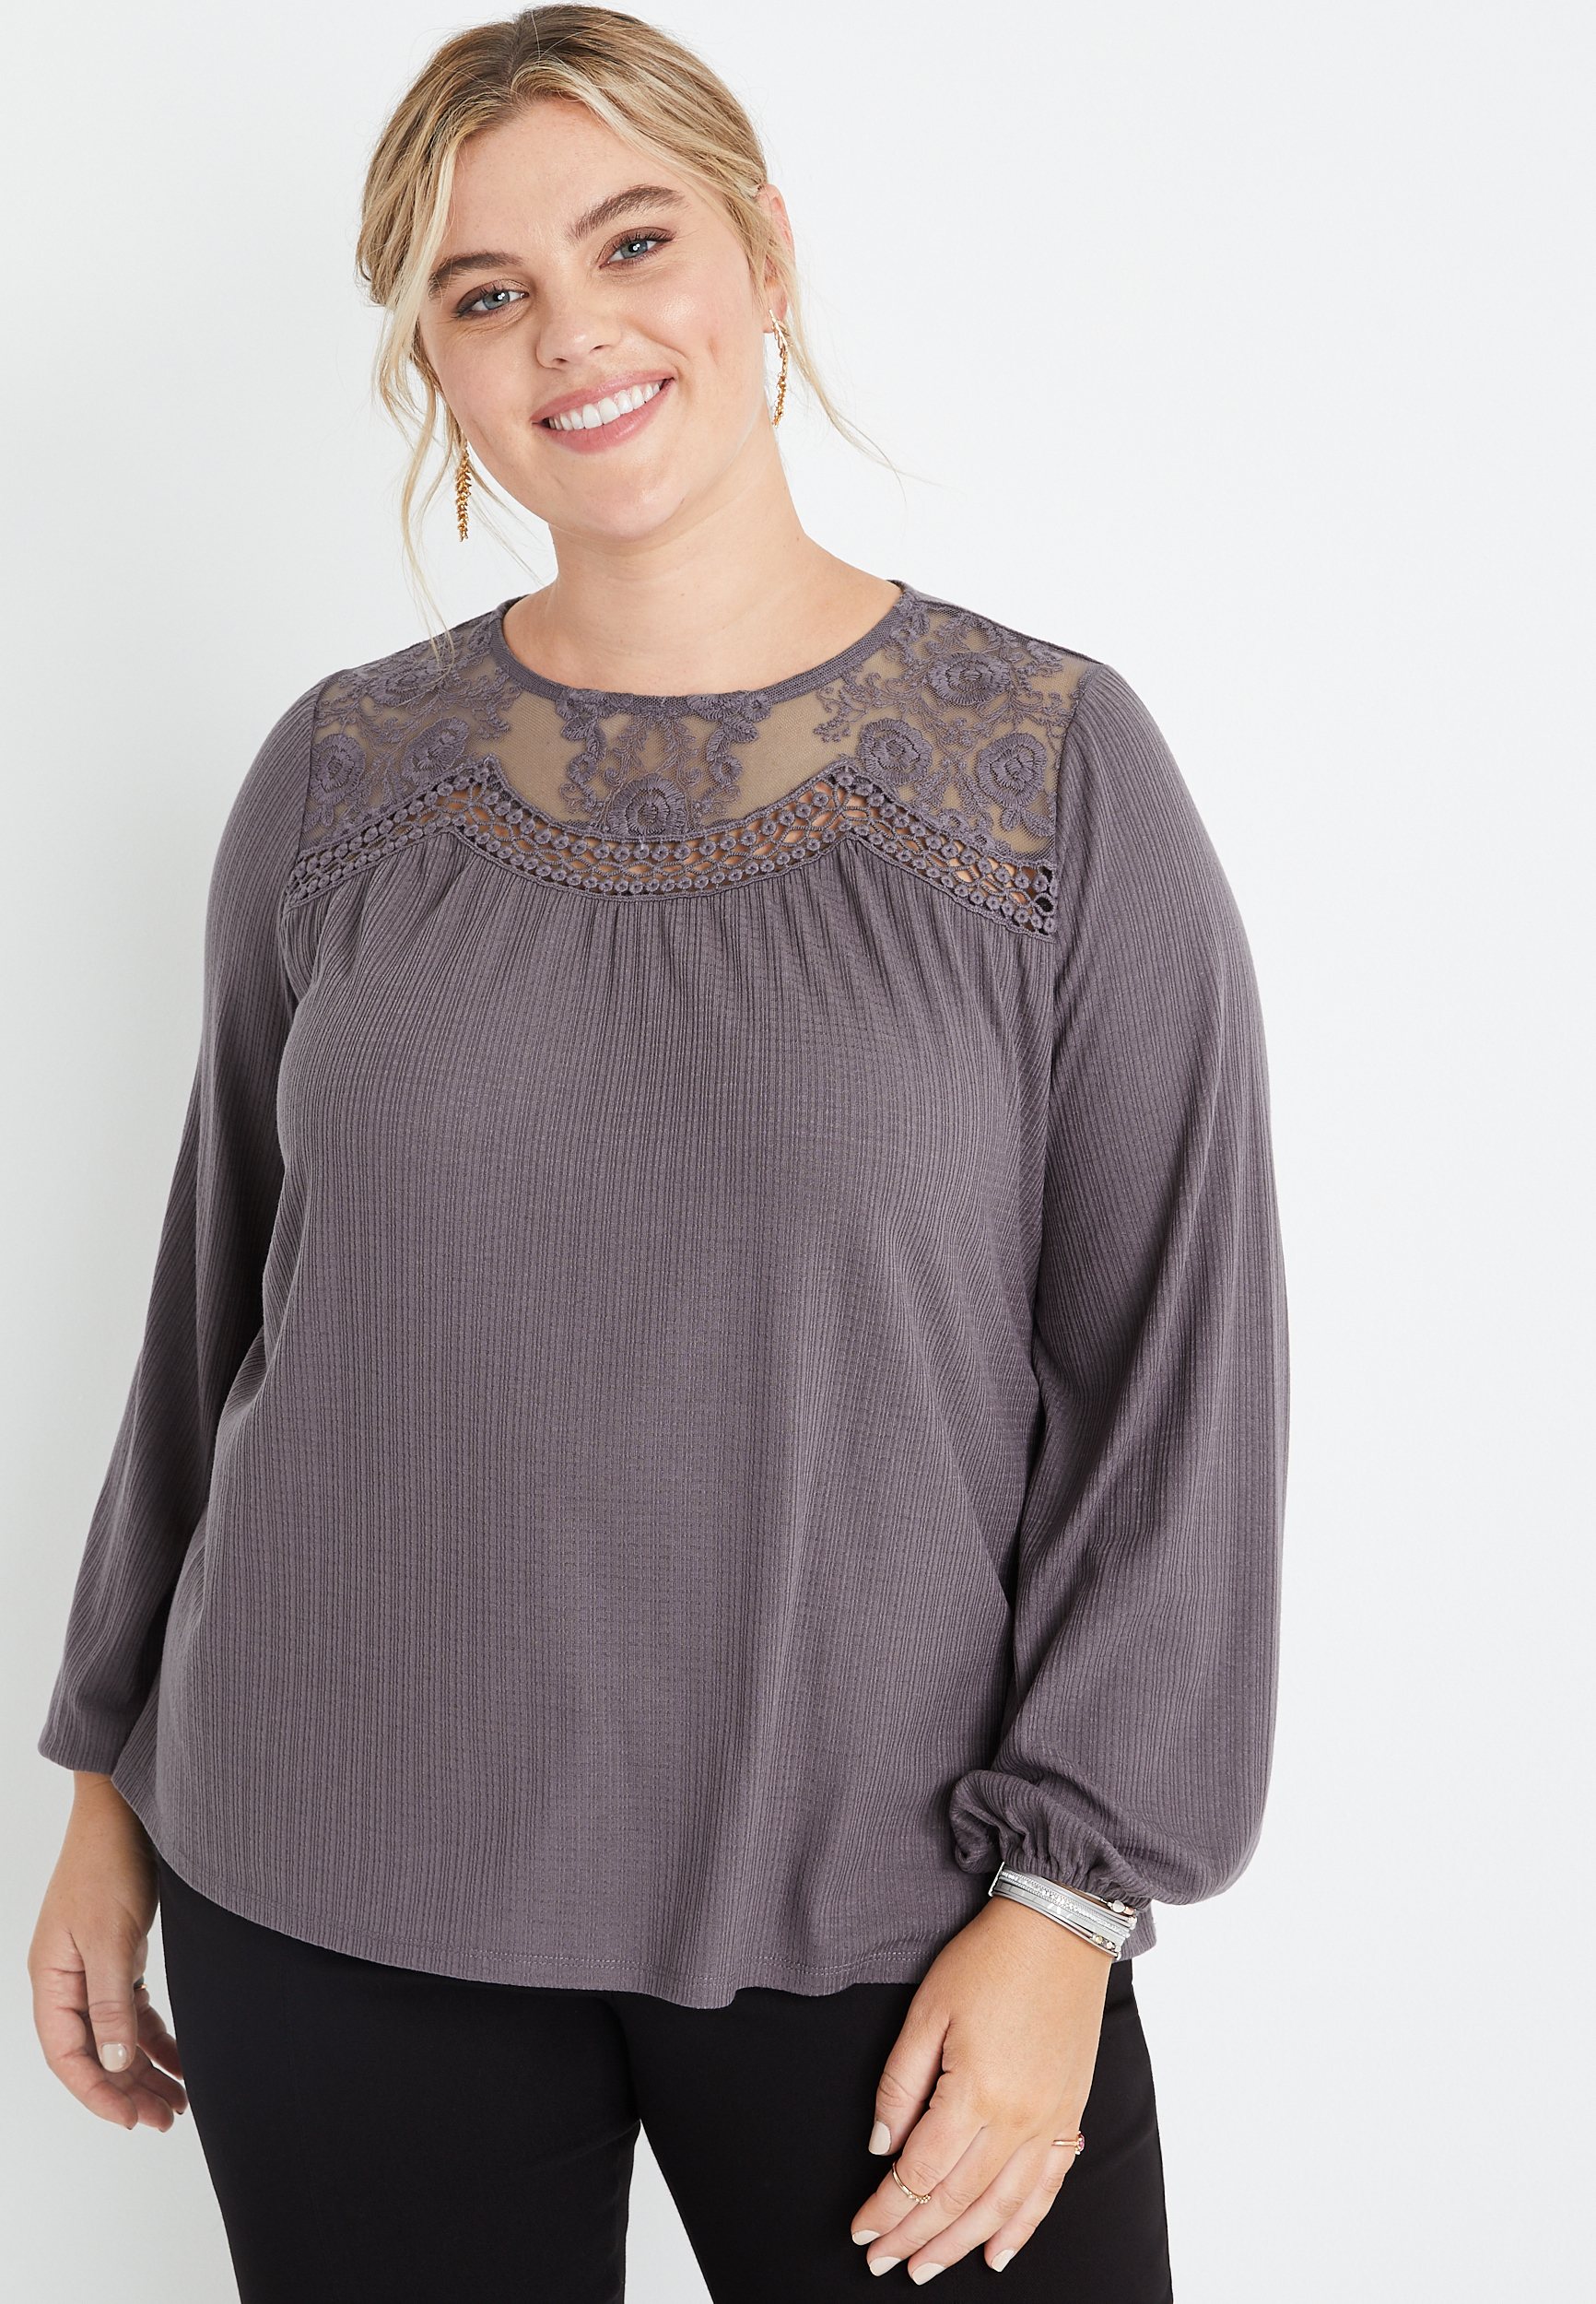 Plus Size Crochet Lace Long Sleeve Top | maurices